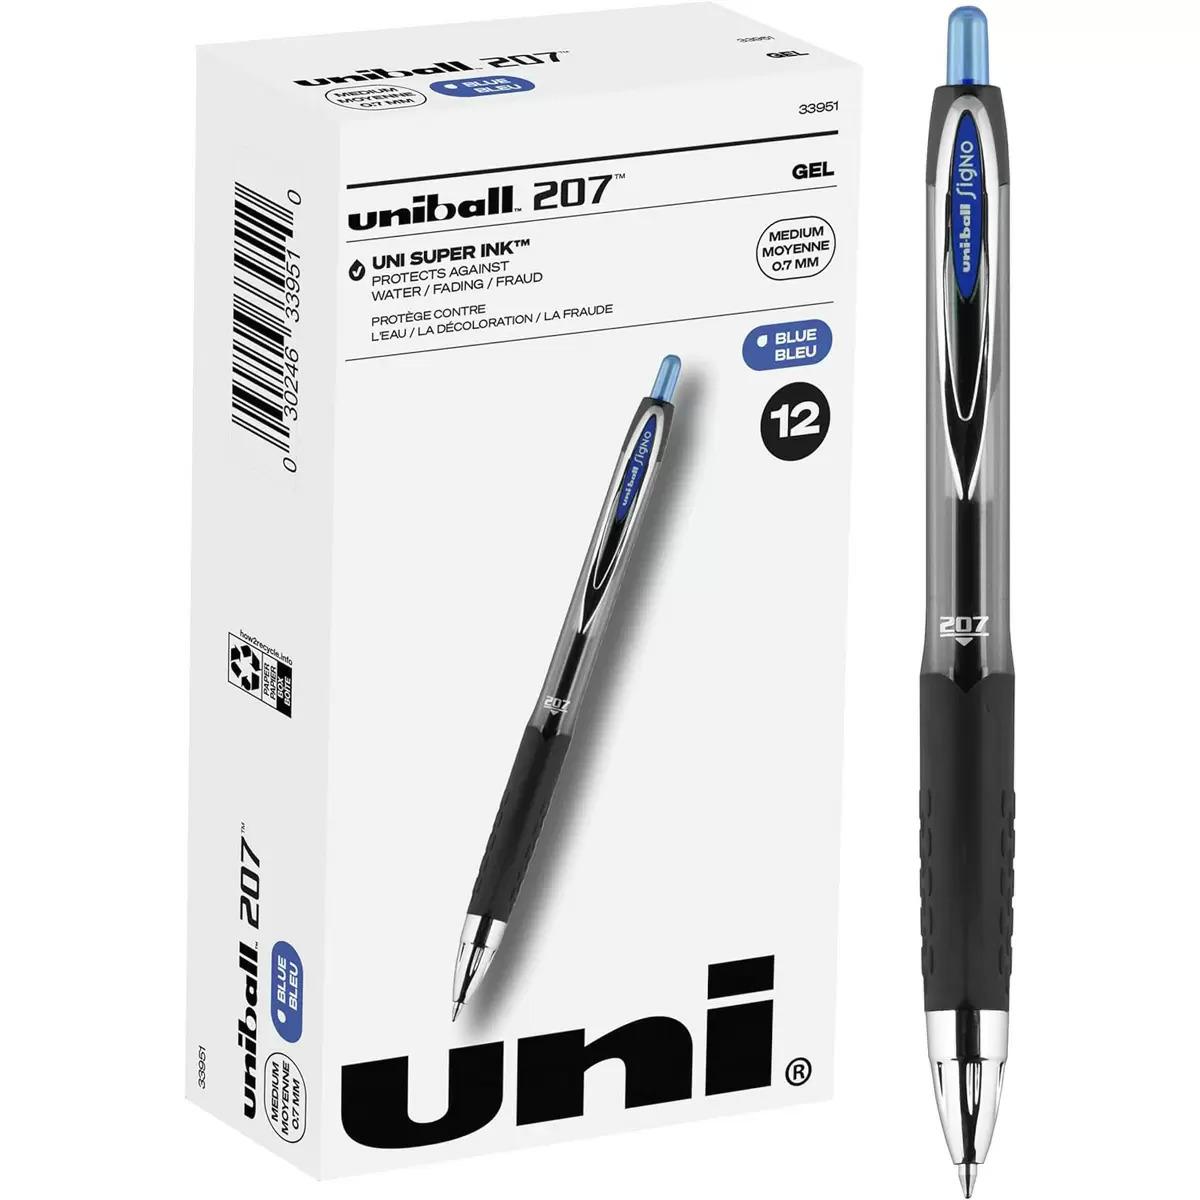 Uniball Signo 207 0.7mm Blue Gel Pens 12 Pack for $6.35 Shipped